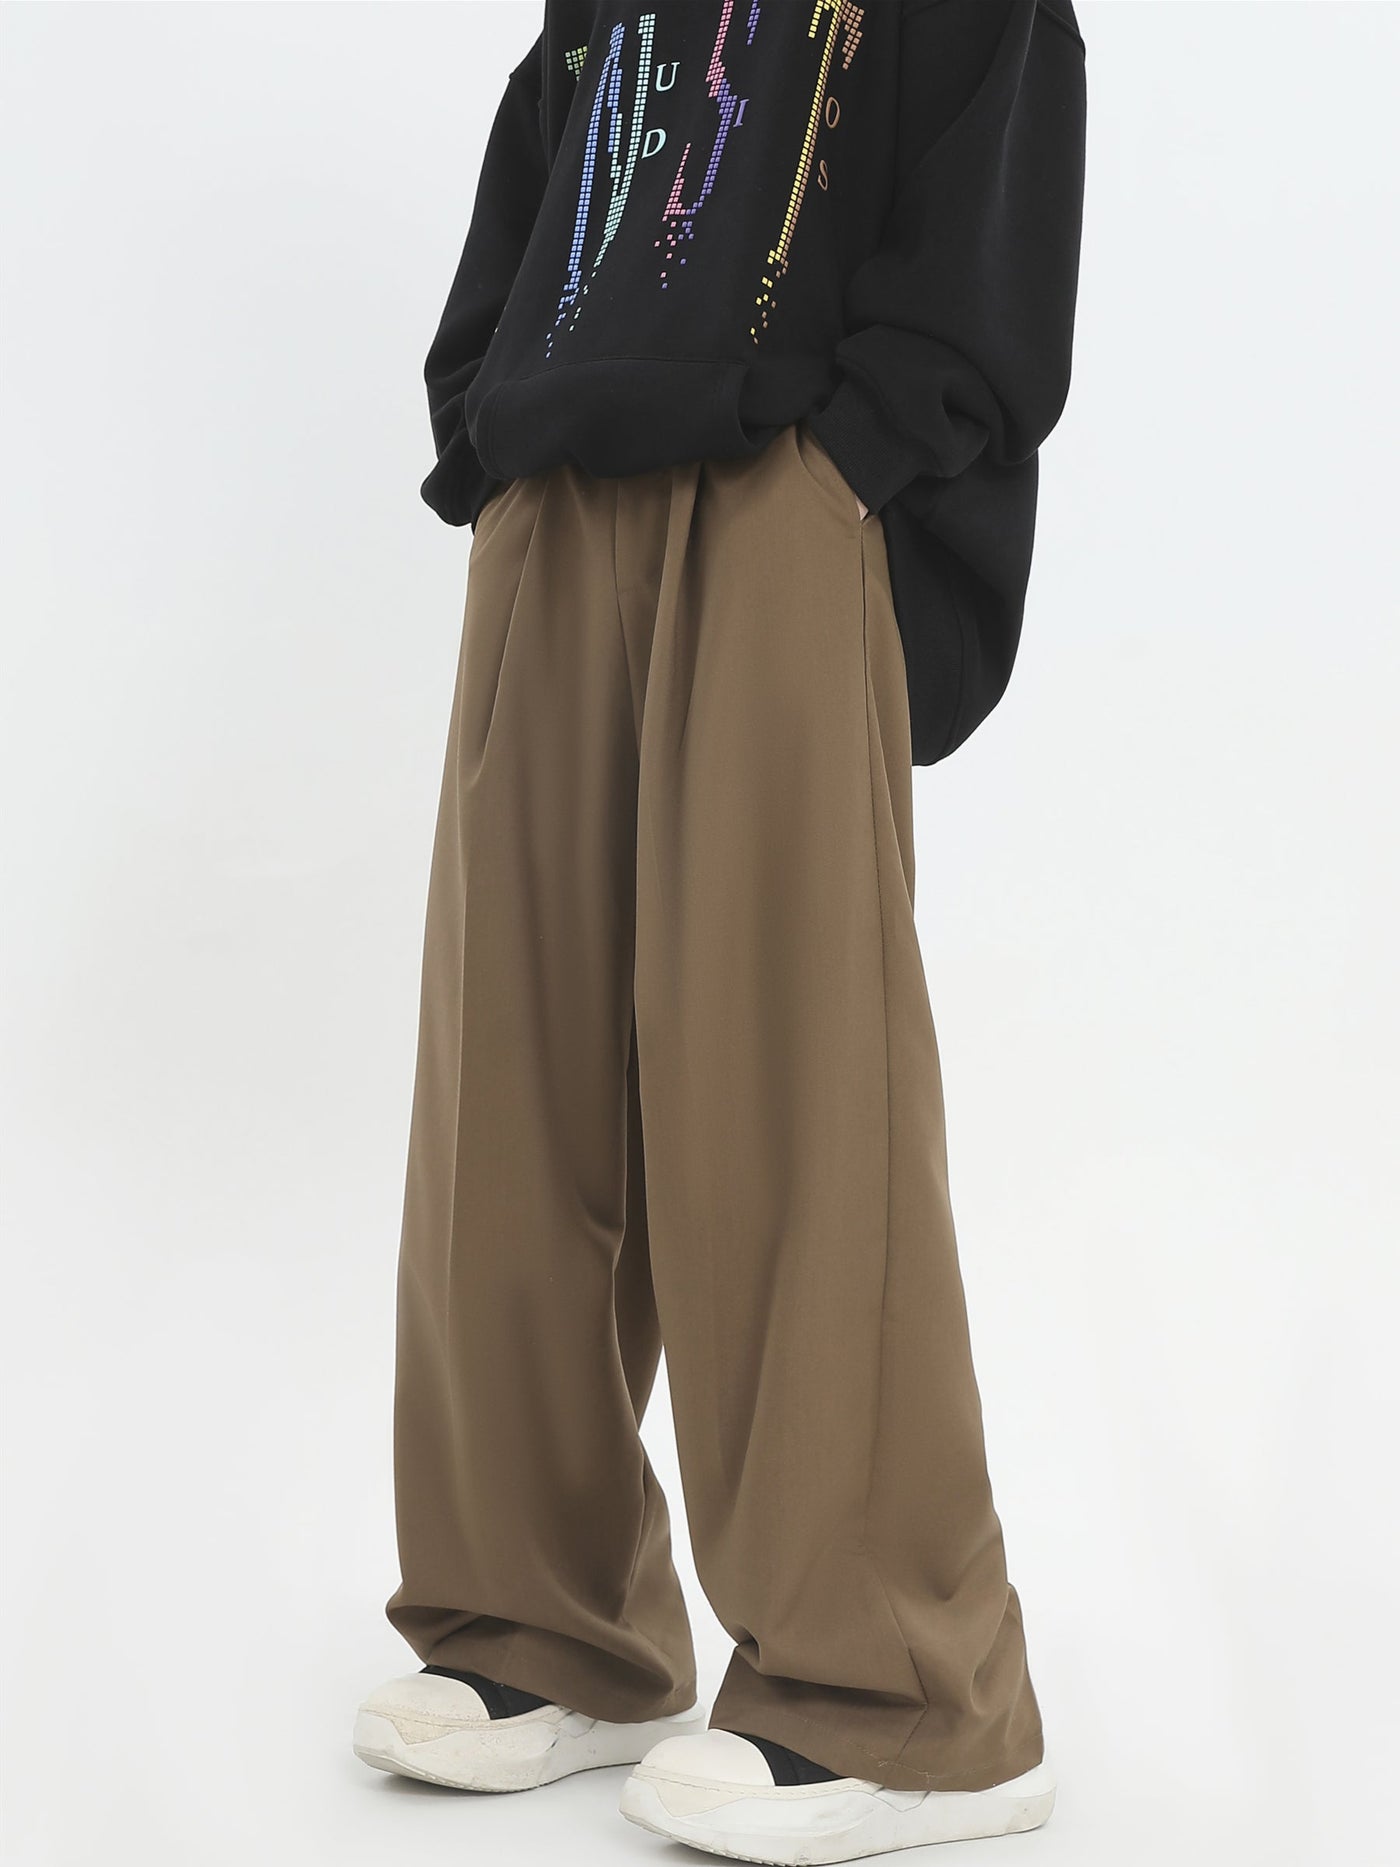 INS Korea Fold Pleated Loose Trousers Korean Street Fashion Pants By INS Korea Shop Online at OH Vault